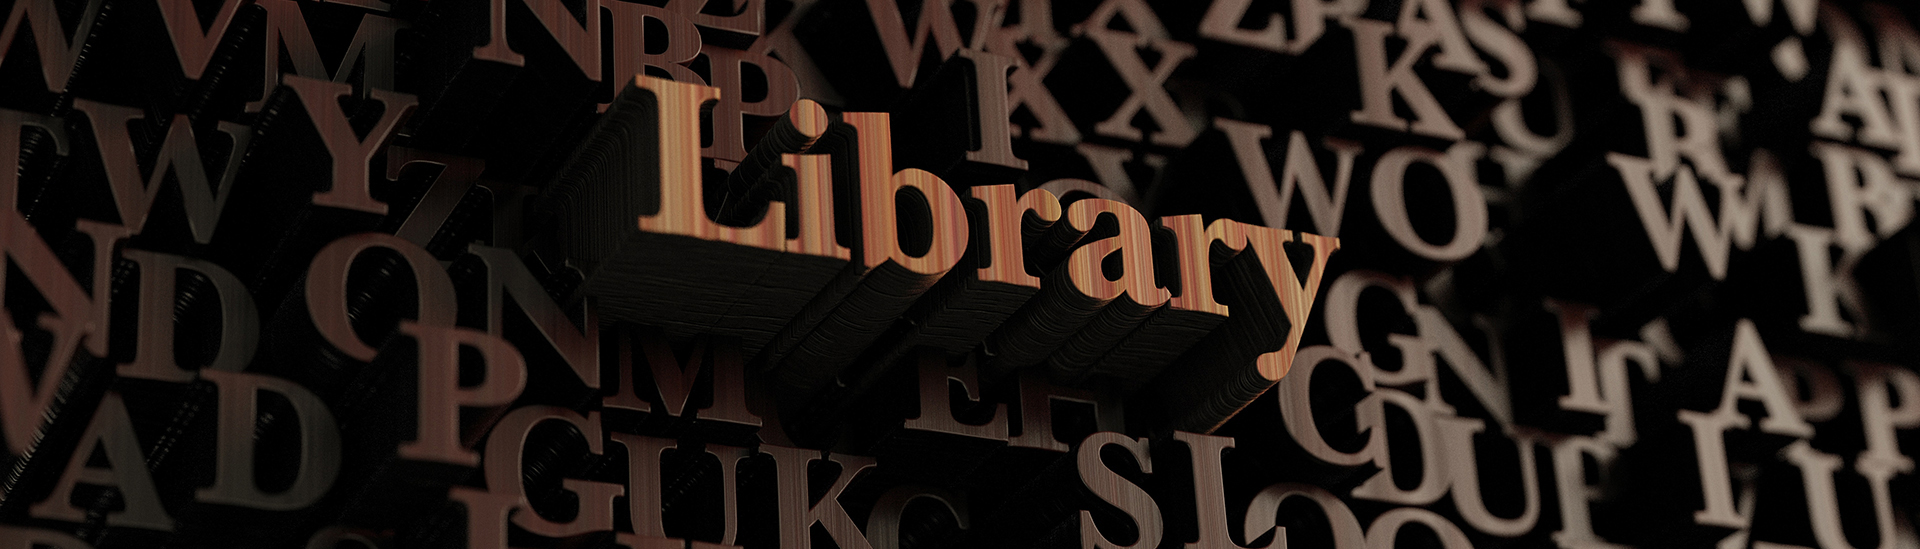 Raised wooden letters that spell the word library - LRMS - g4 library automation software